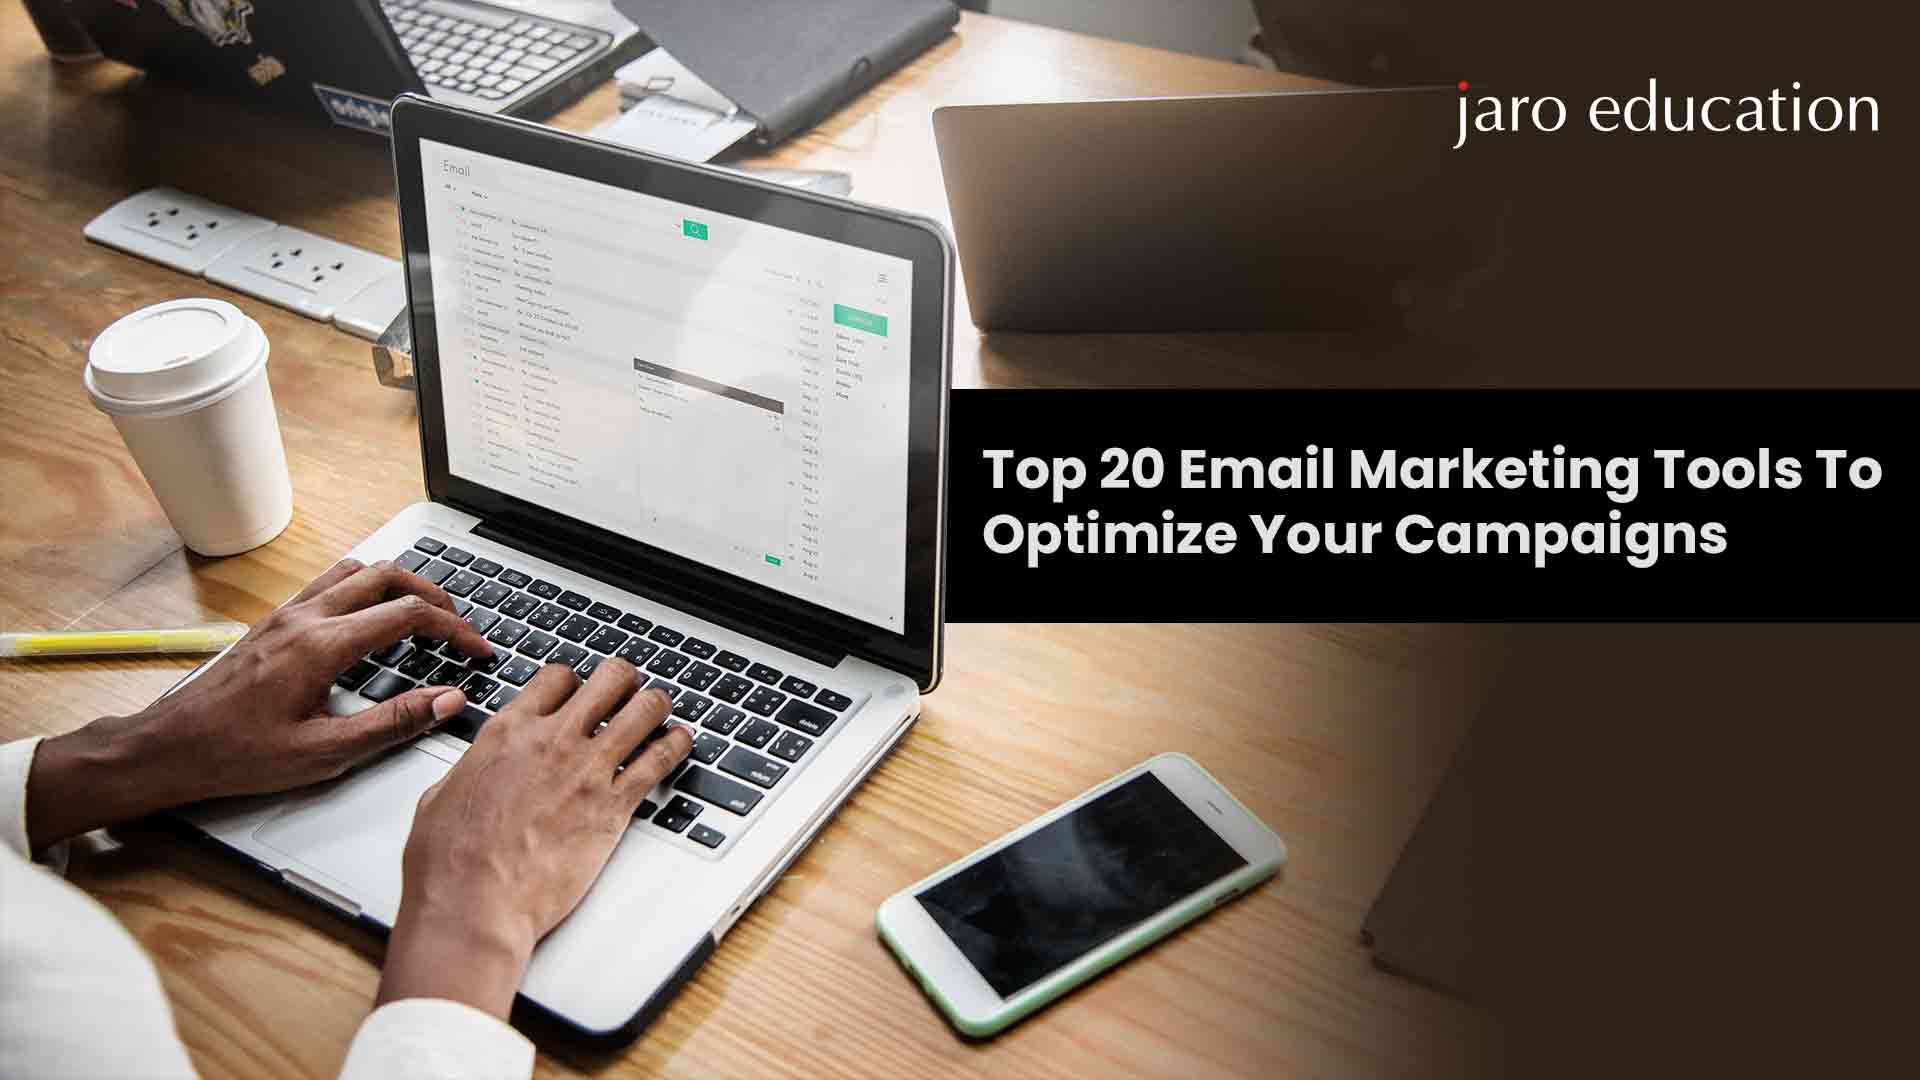 Top 20 Email Marketing Tools To Optimize Your Campaigns